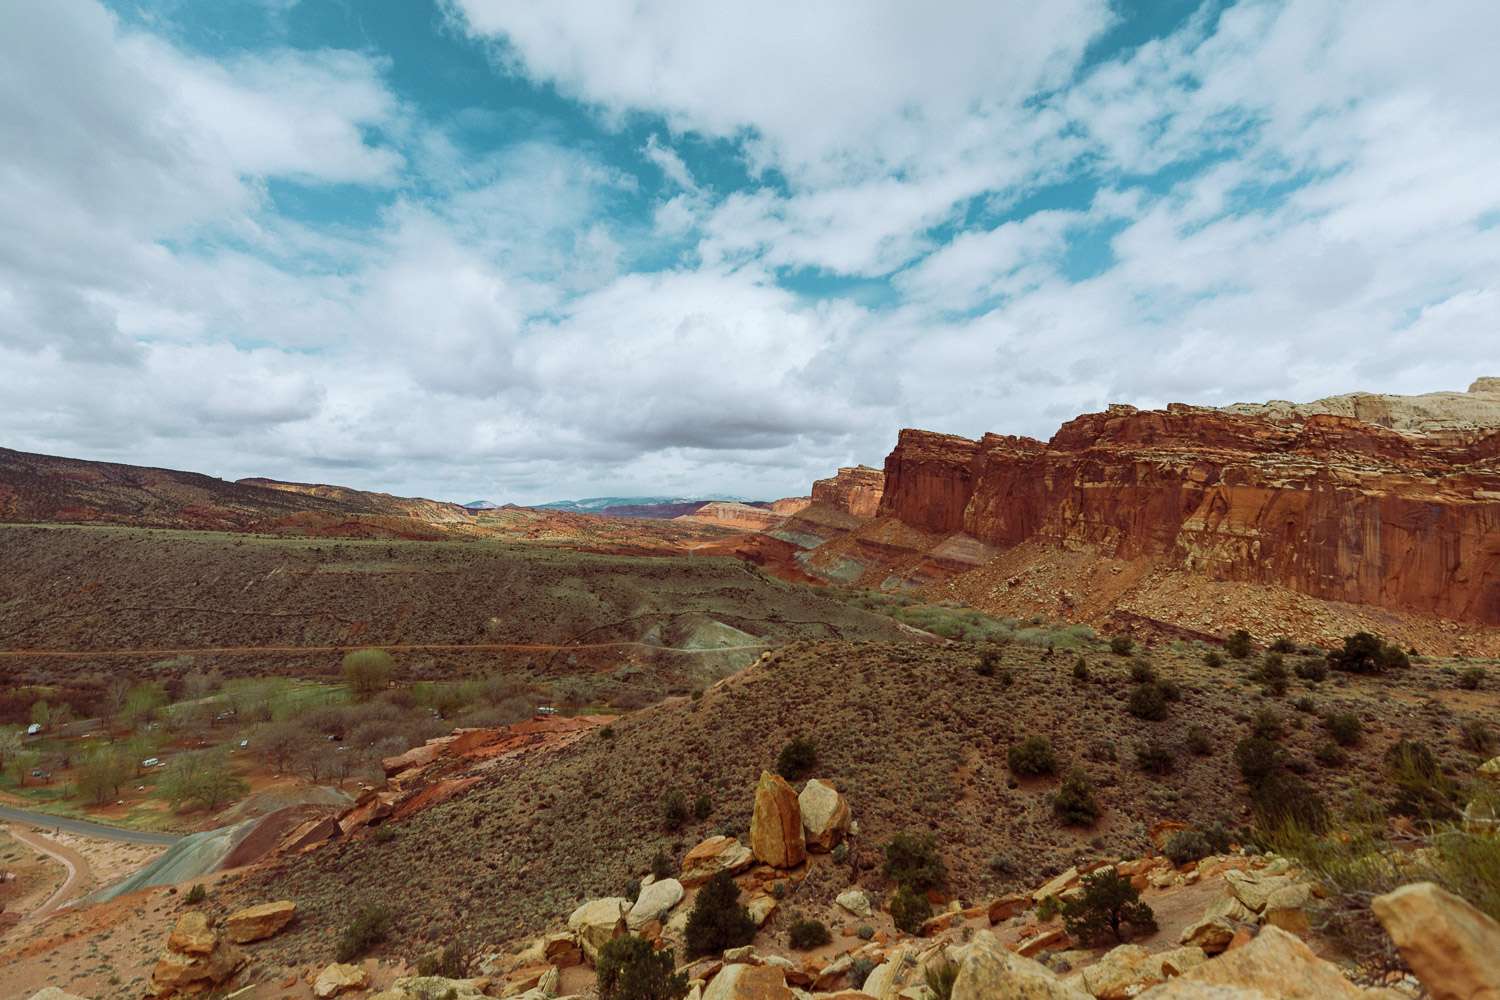 Rachel Off Duty: The View of Canyonlands National Park